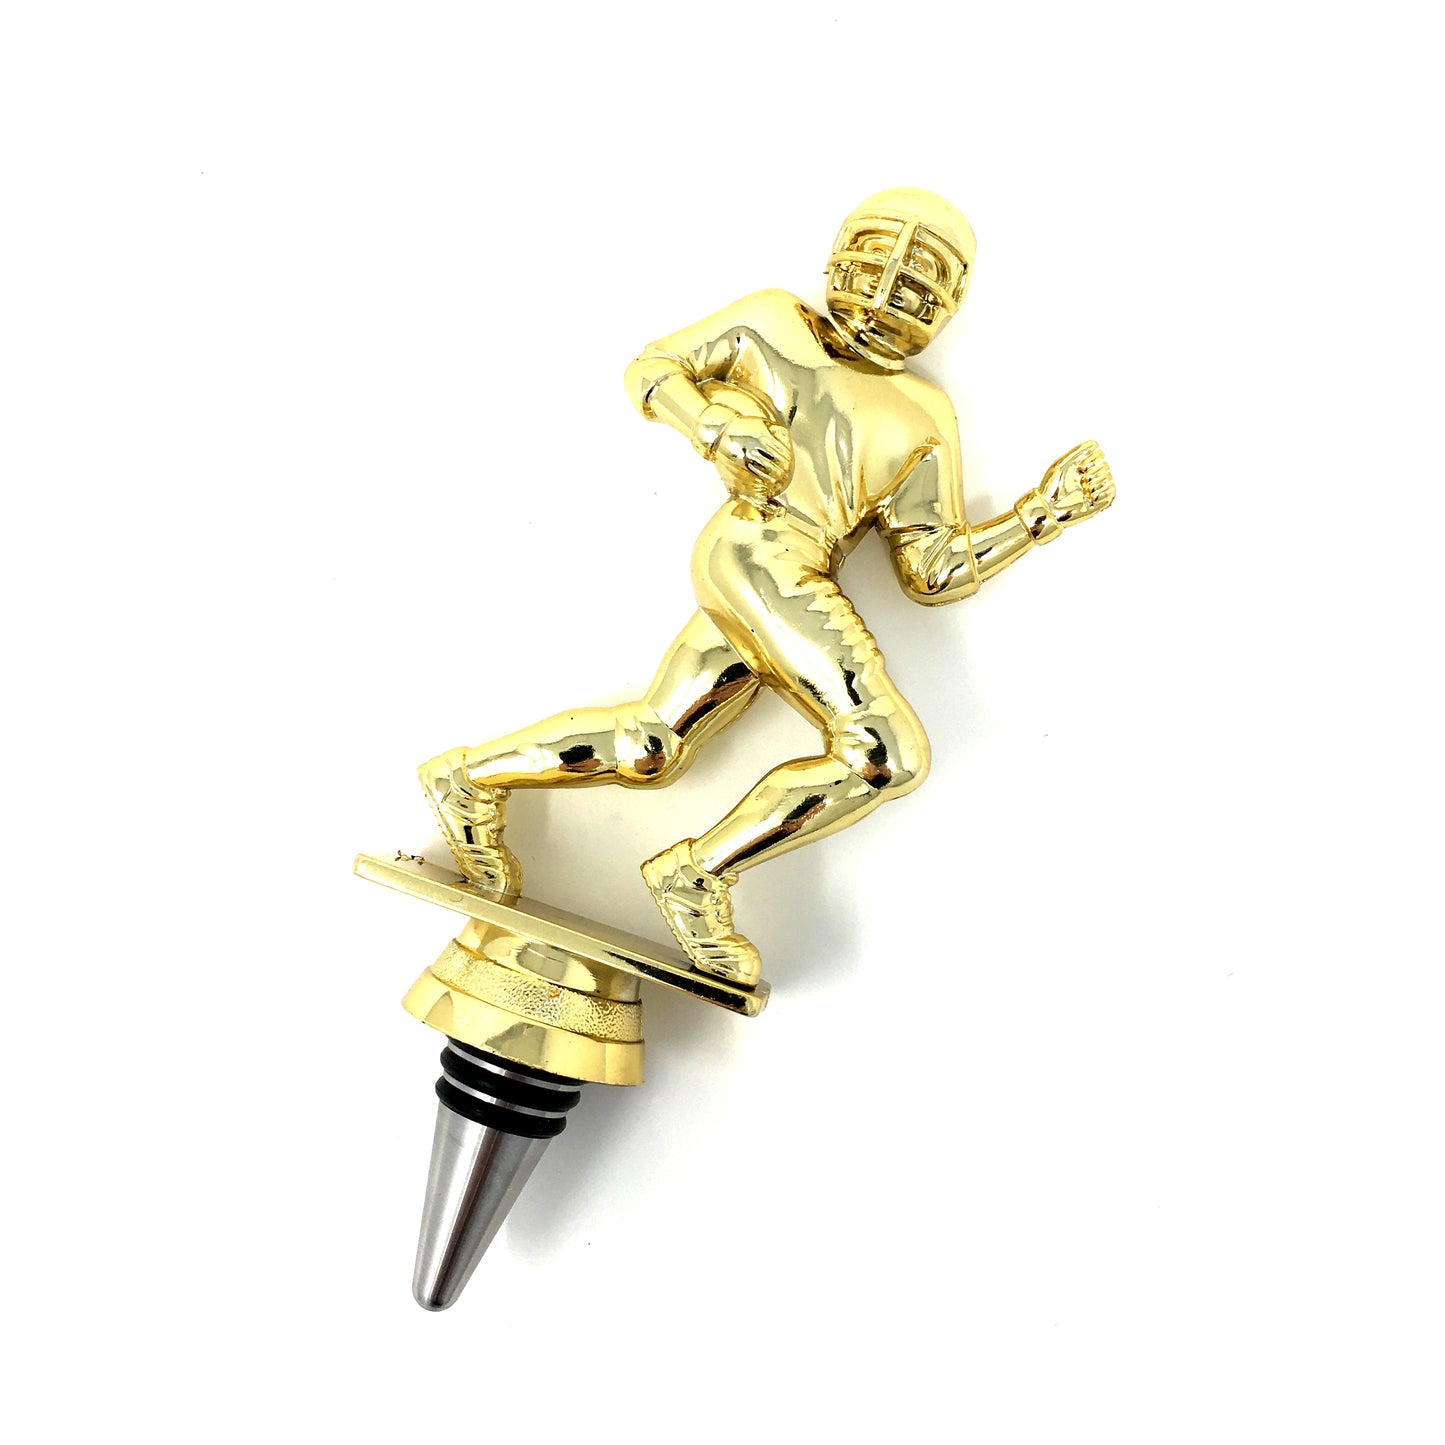 Football Trophy Wine Bottle Stopper with Stainless Steel Base